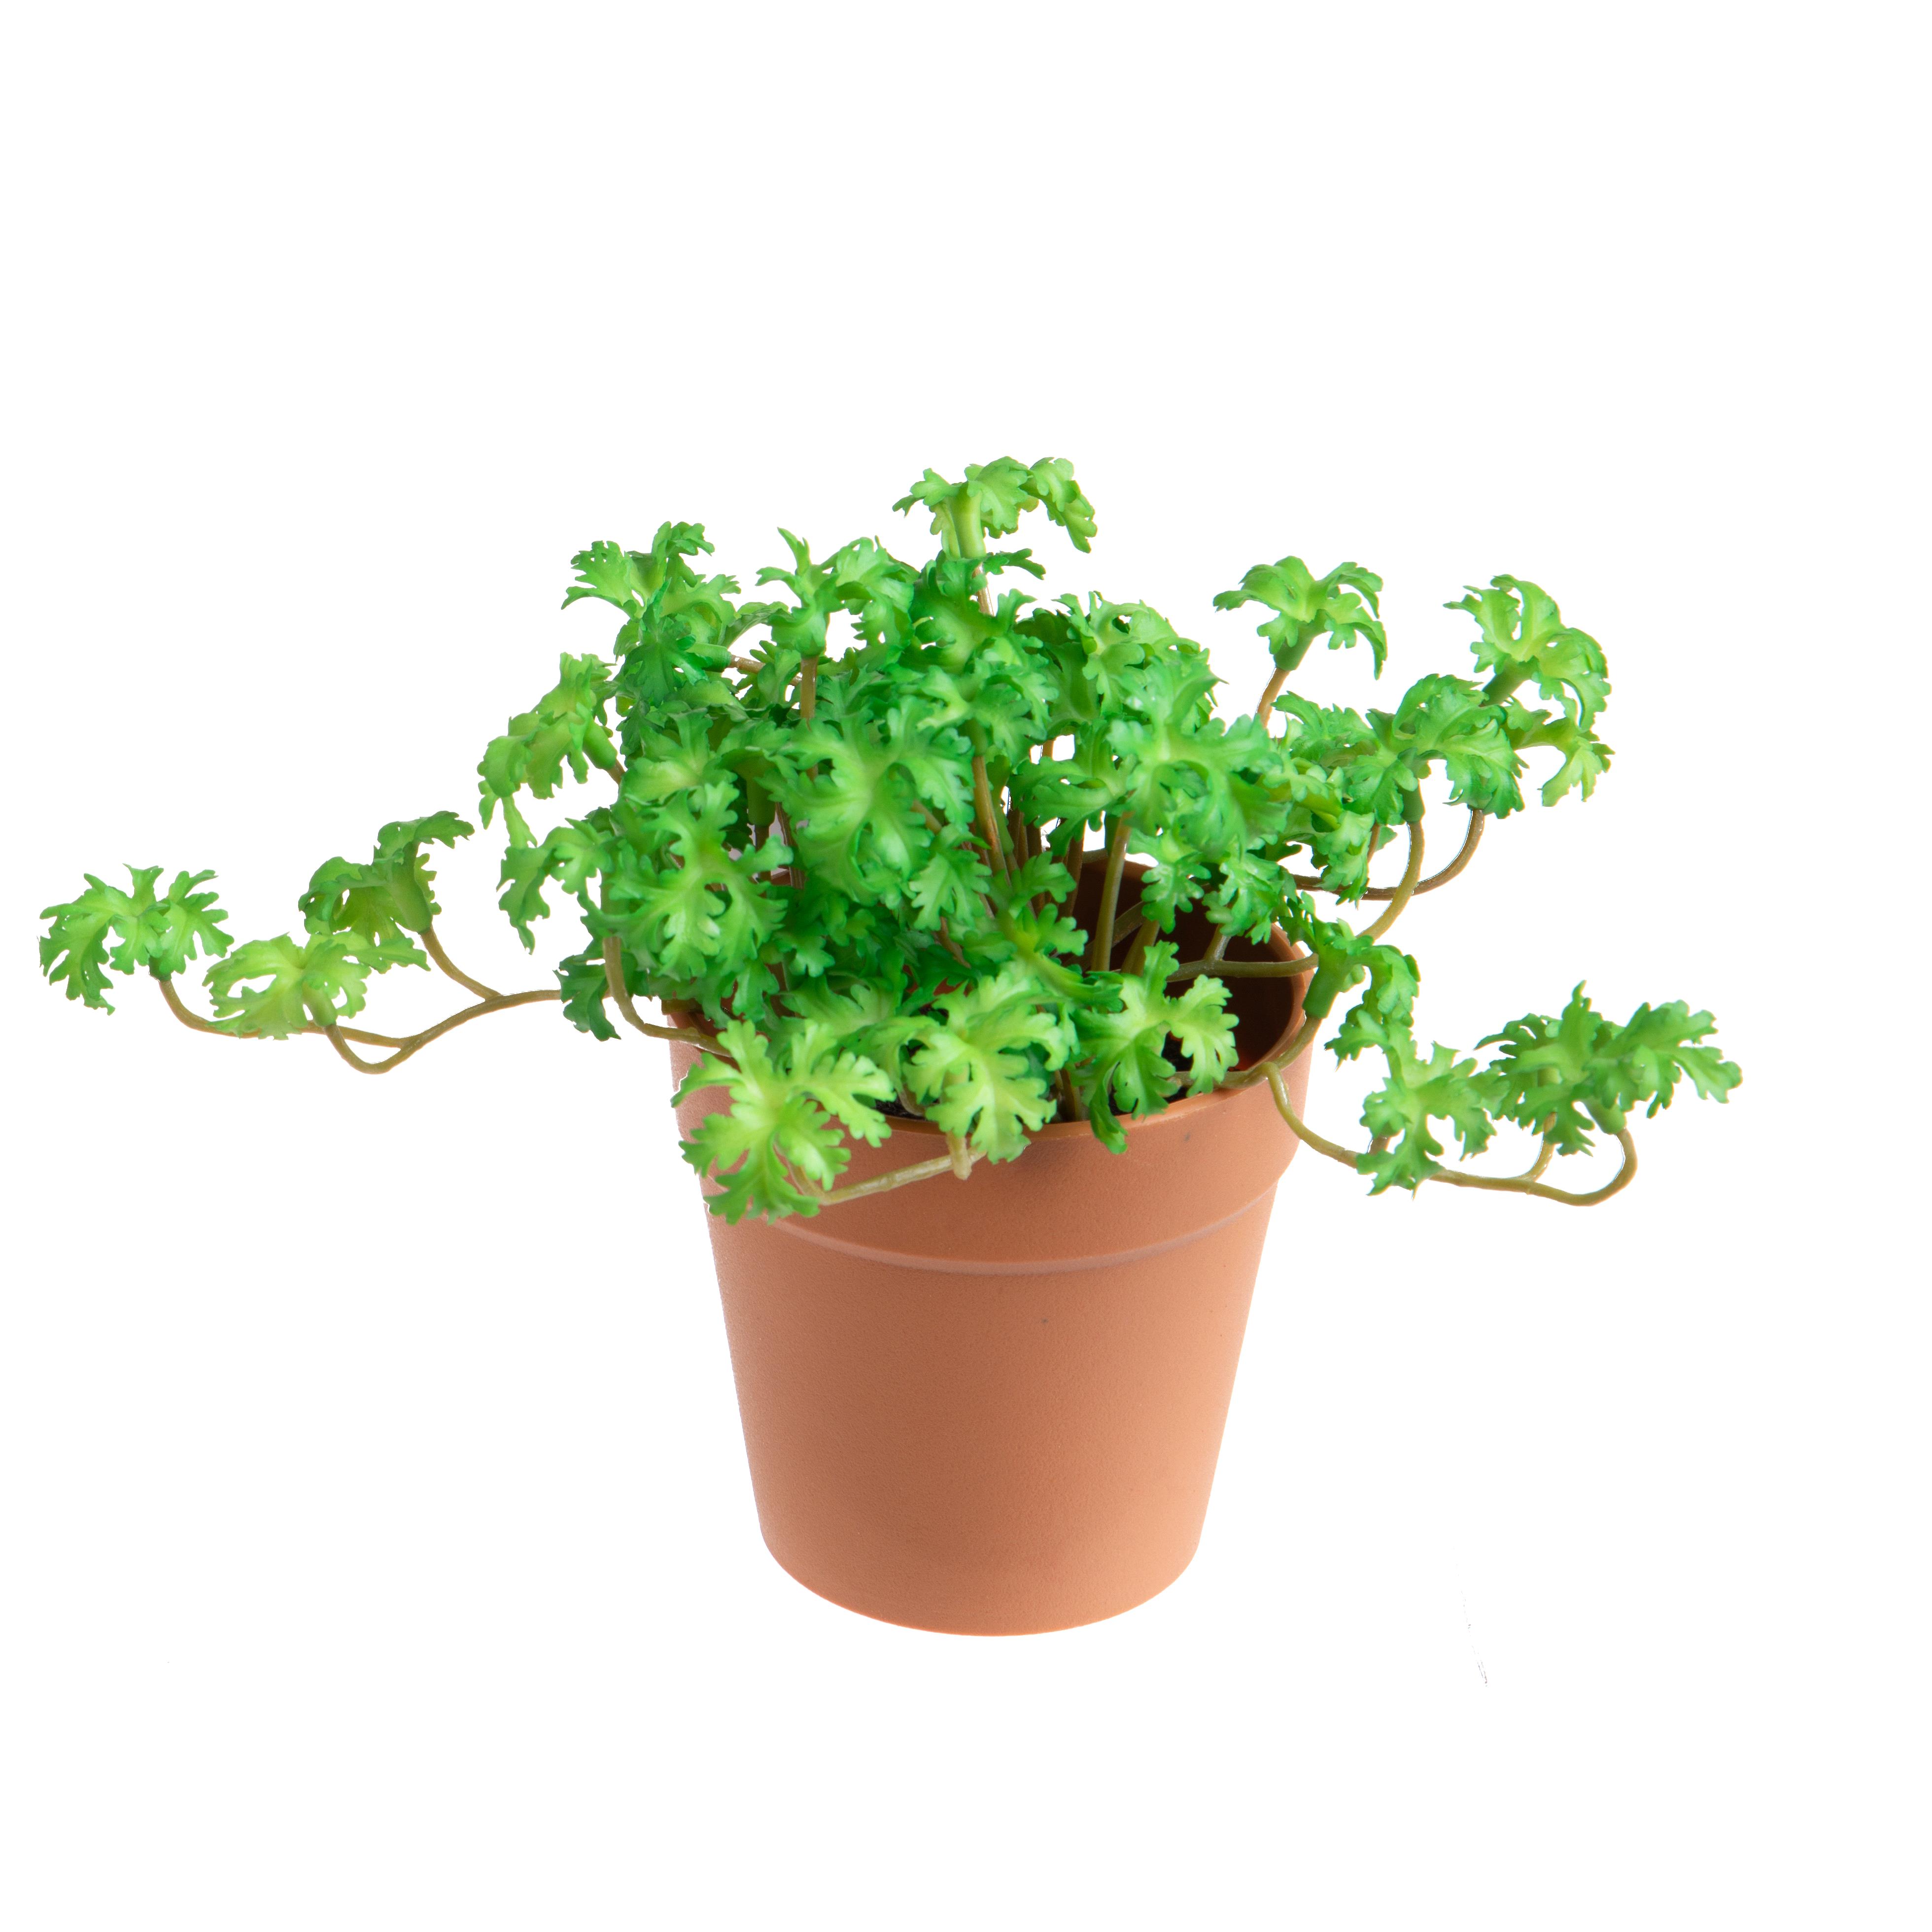 CHRISTMAS ITEMS,DRIED FLOWERS AND STEM ITEMS FOR CHRISTMAS,PELARGONIUM IN VASO 16 CM